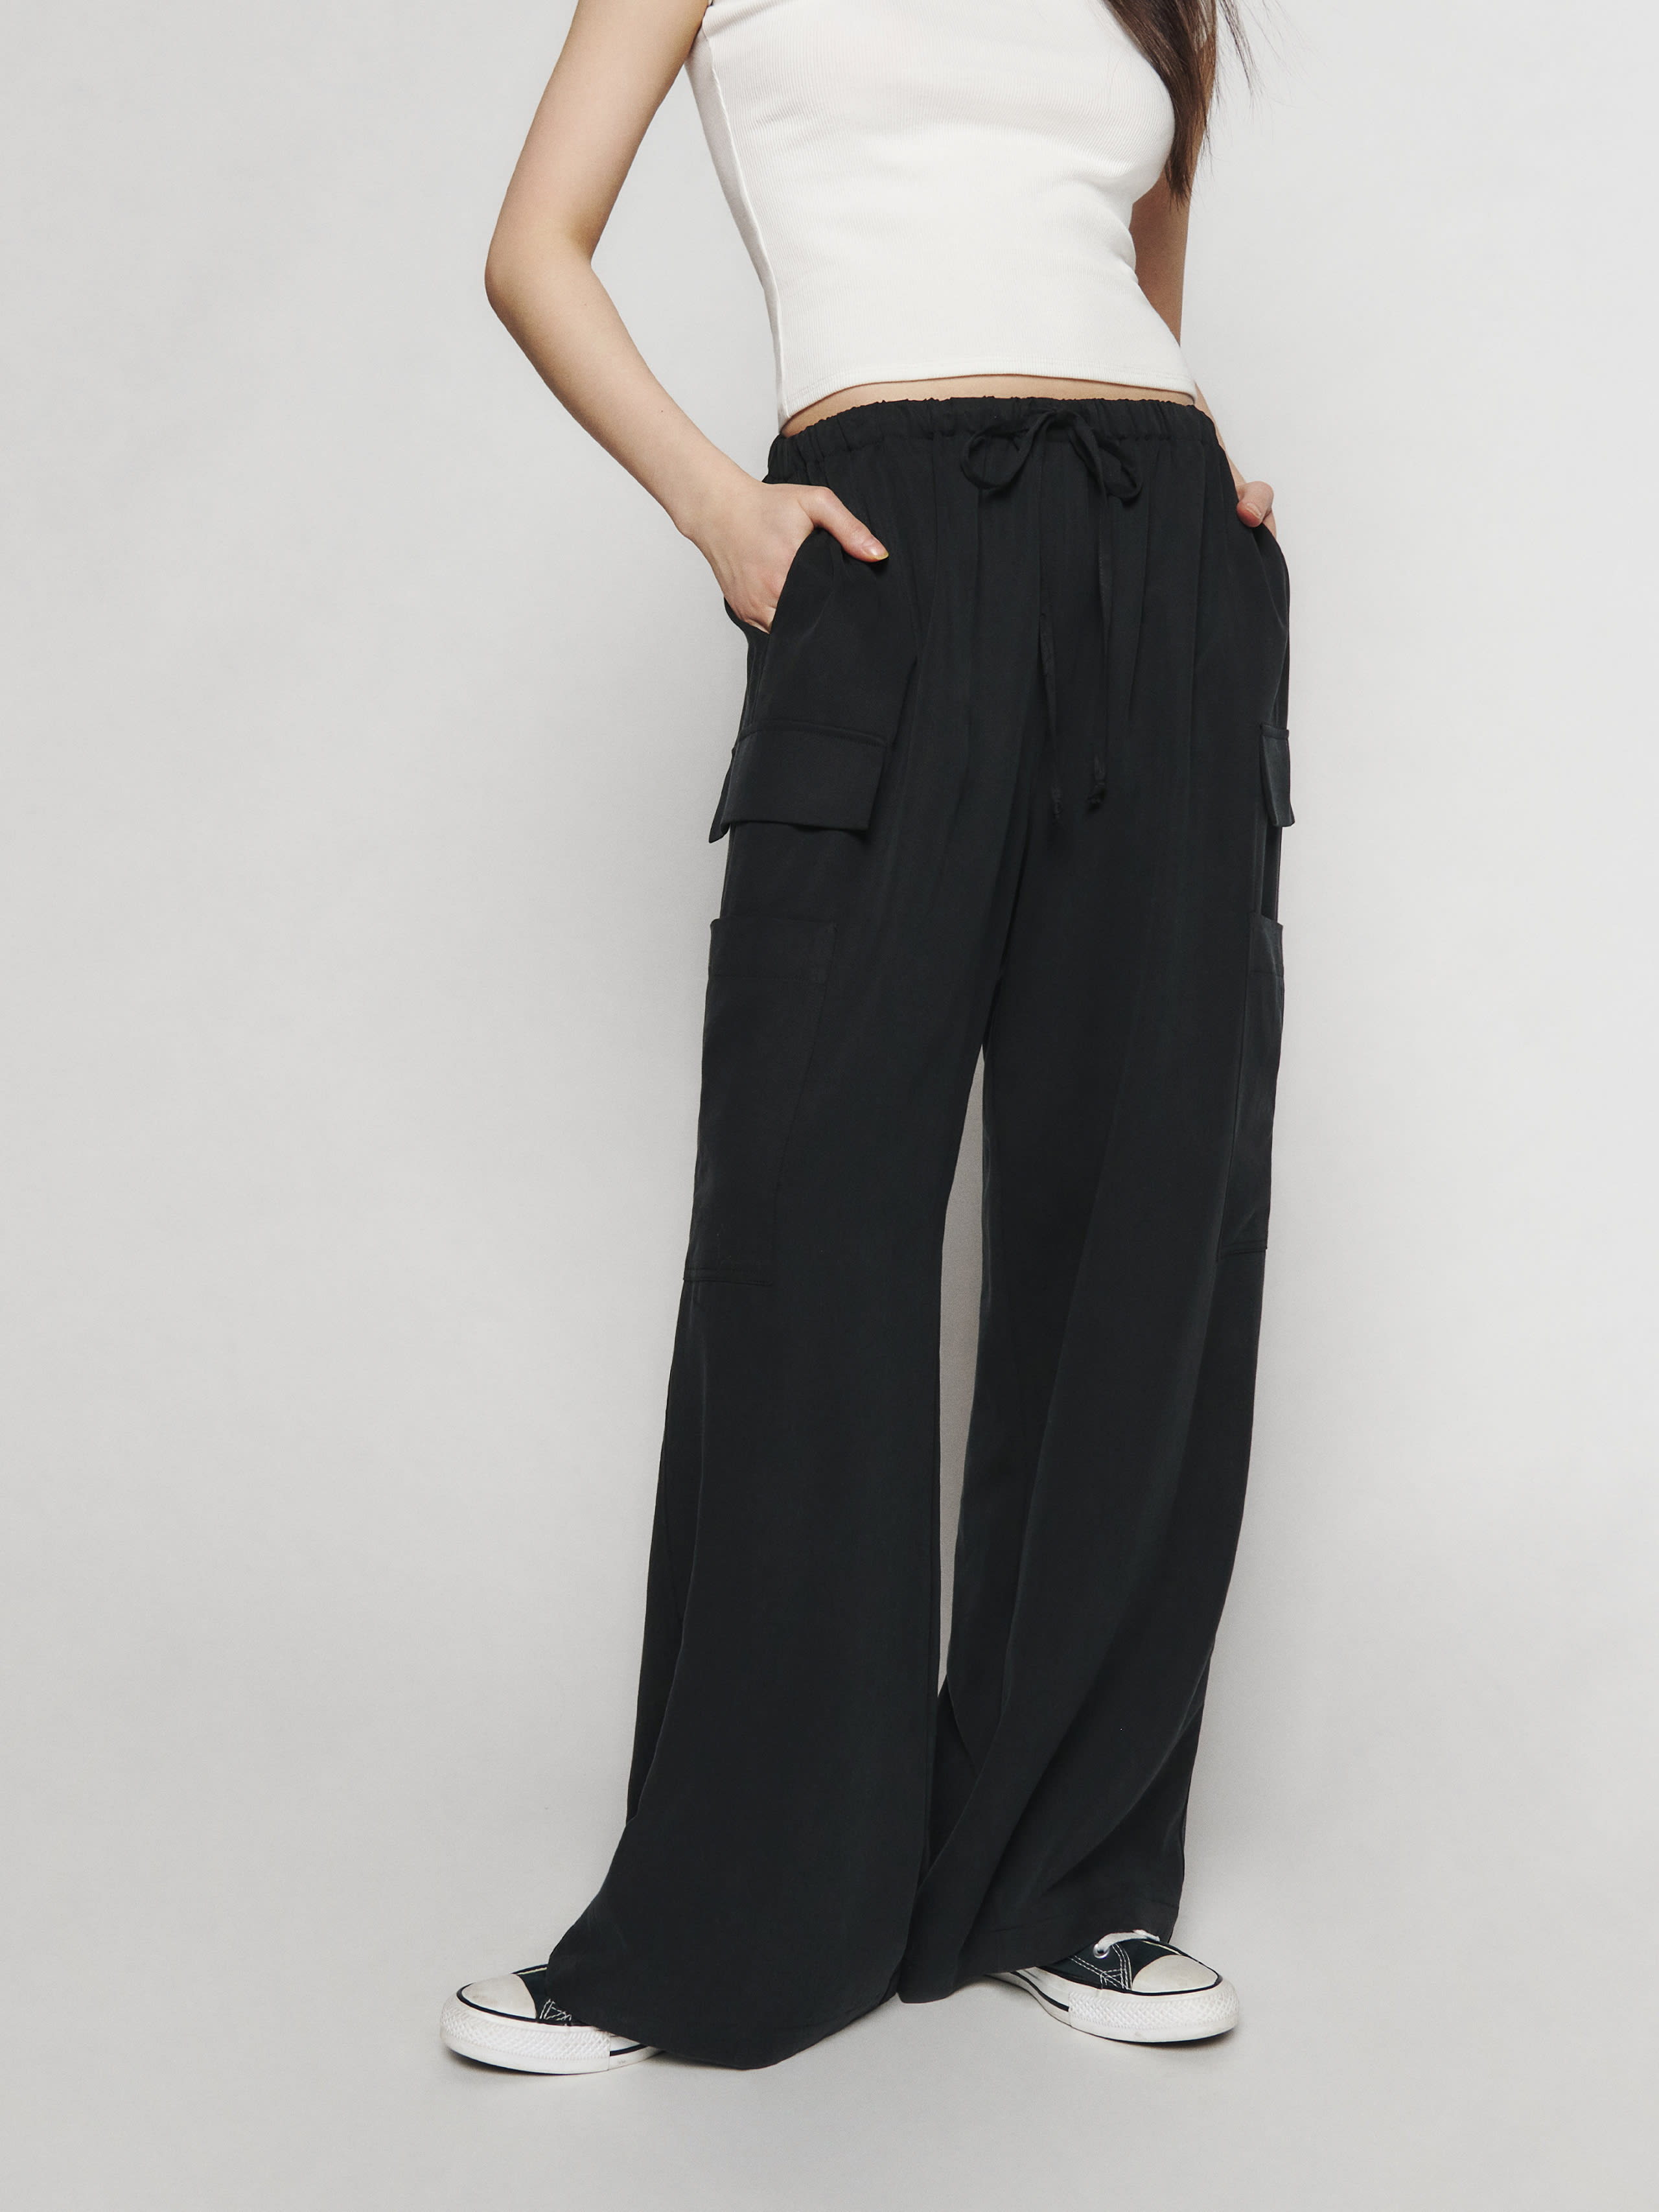 Reformation Ethan Twill Trouser In Black